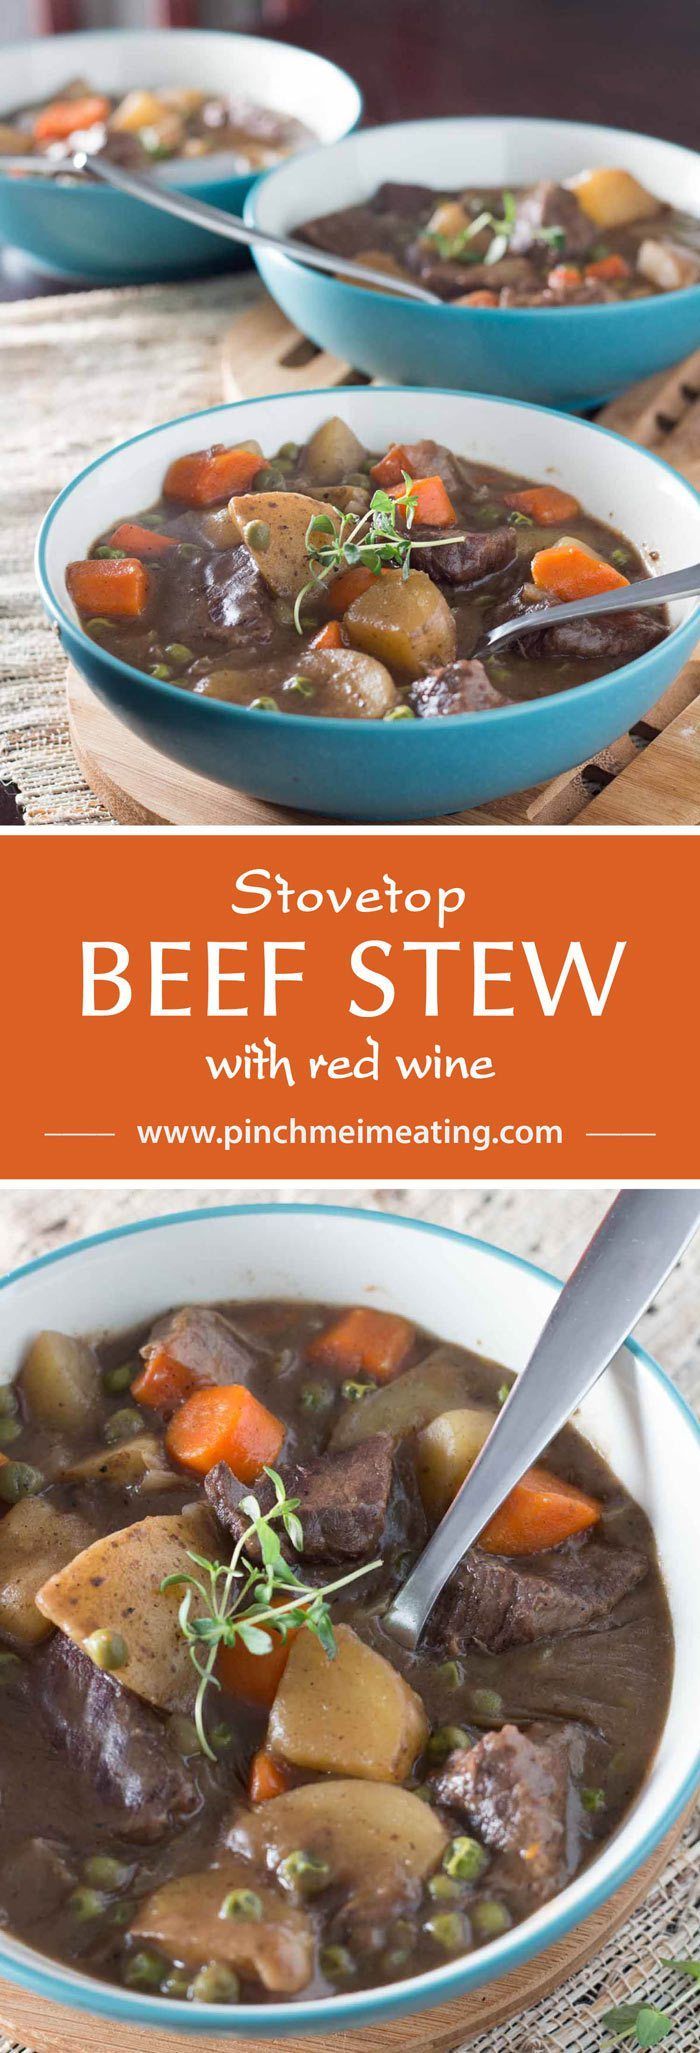 Easy Beef Stew Recipe With Wine